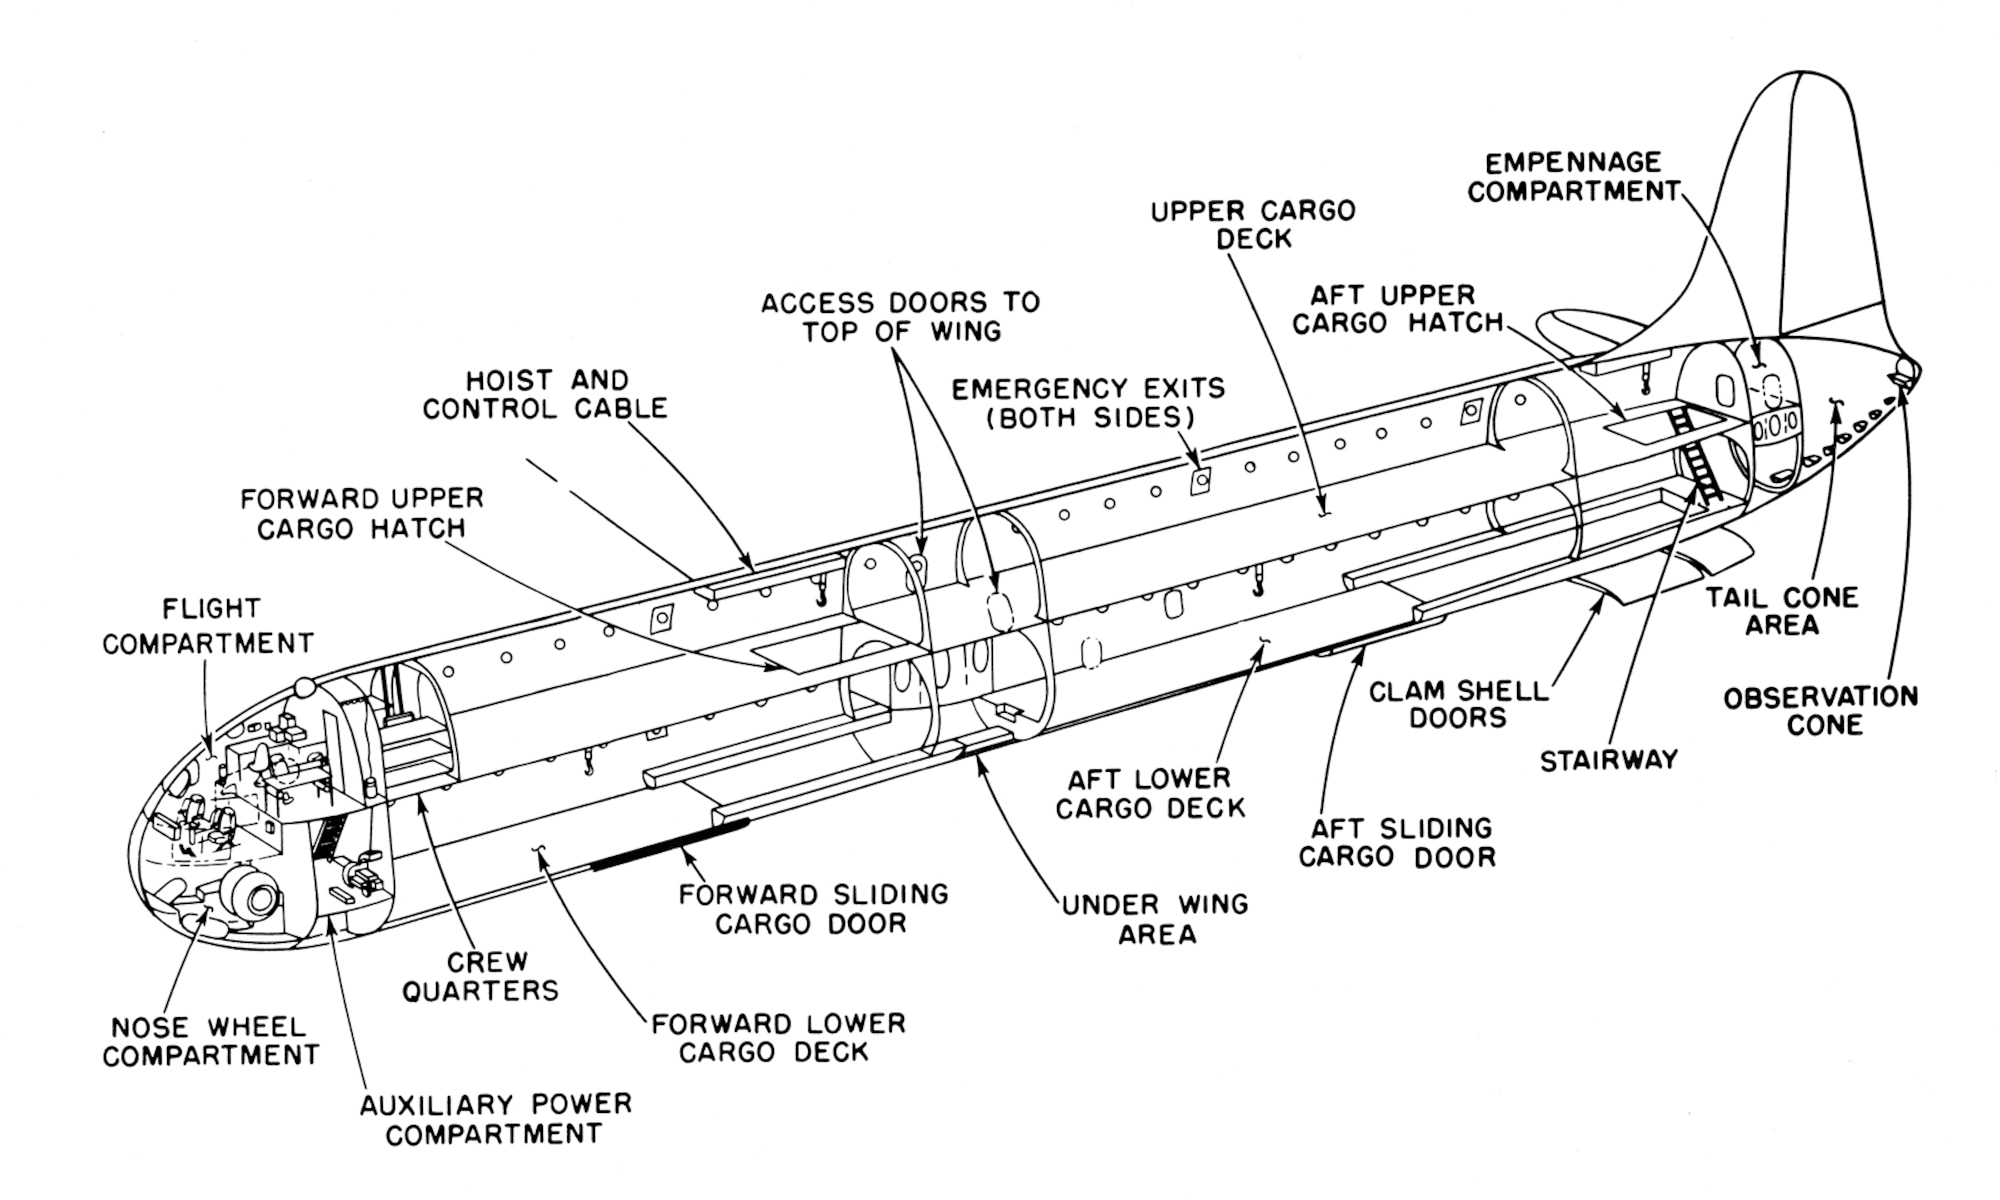 Interior details of the XC-99. (U.S. Air Force photo).